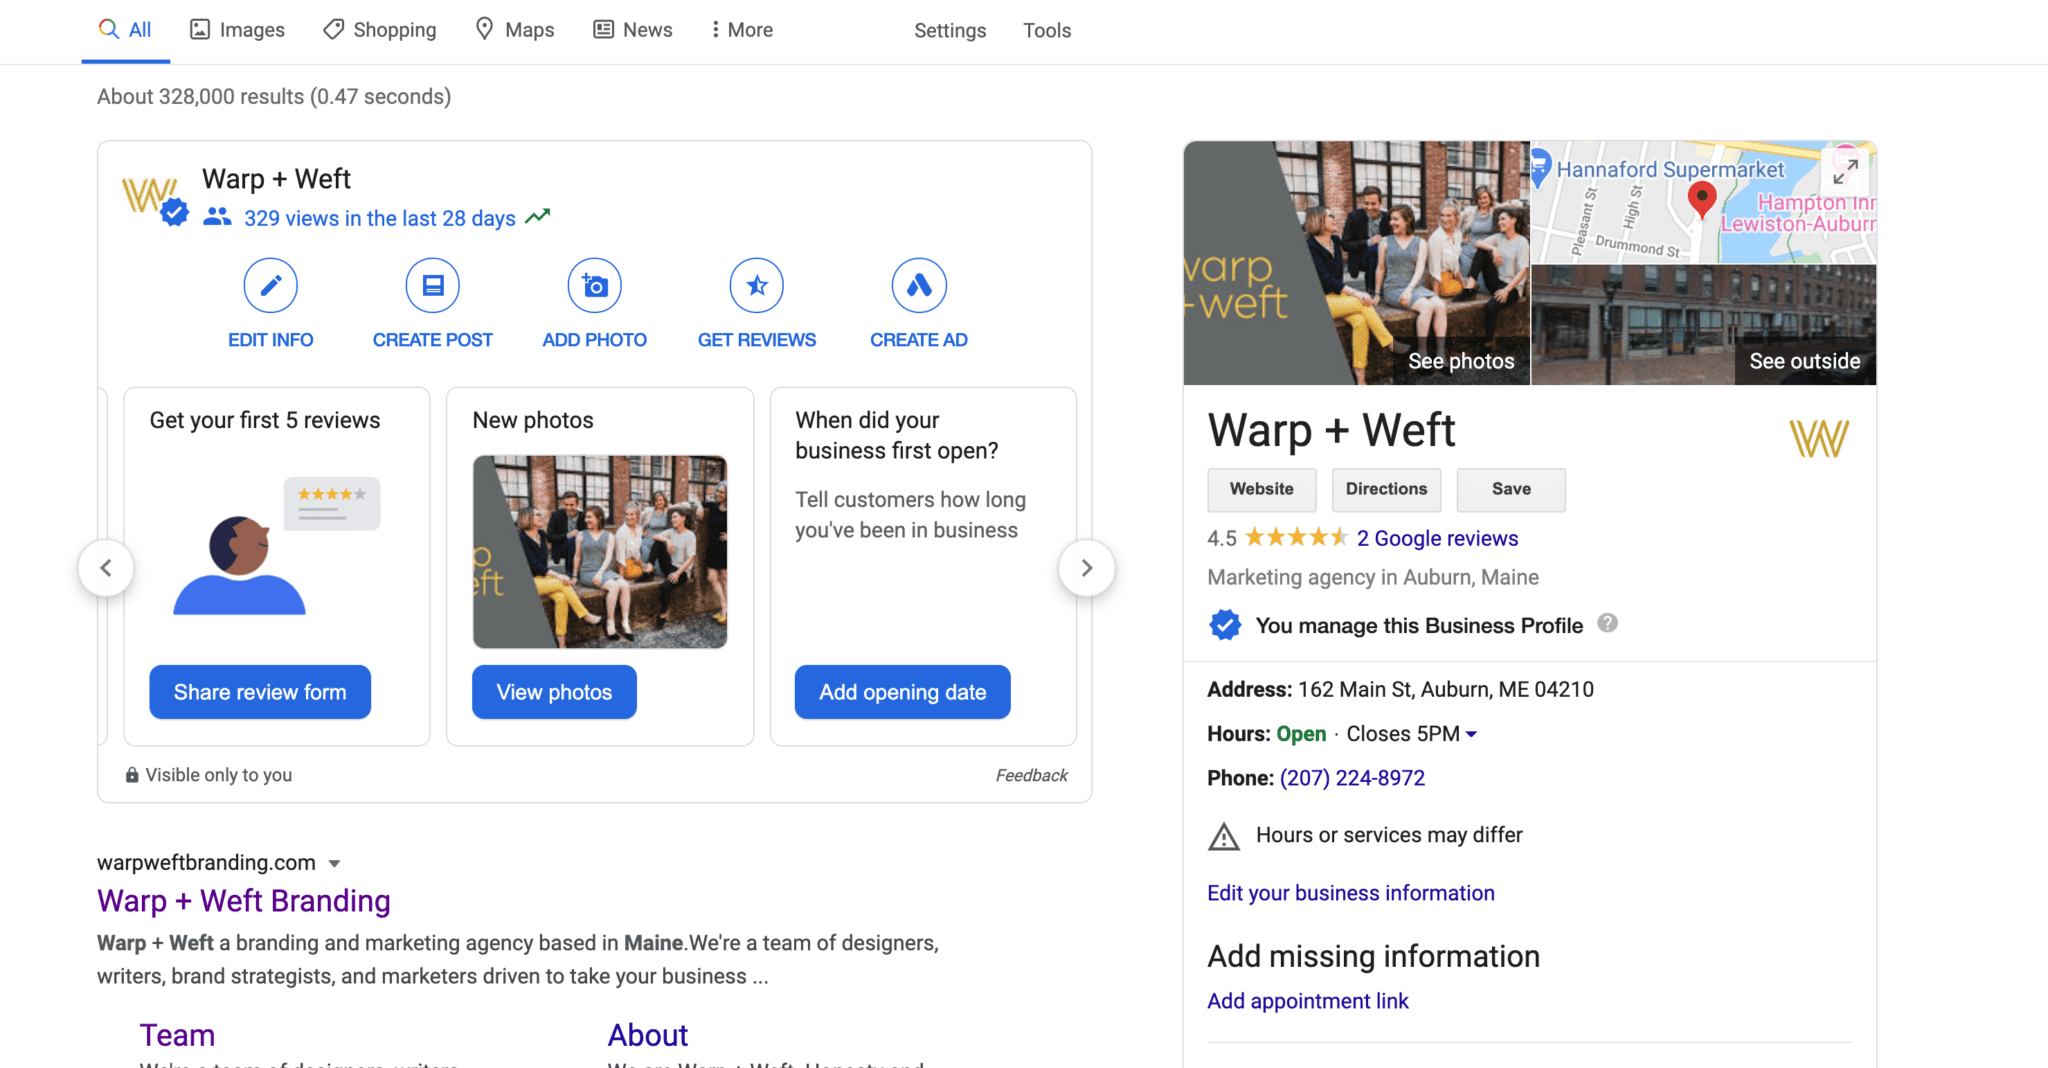 google business page log in